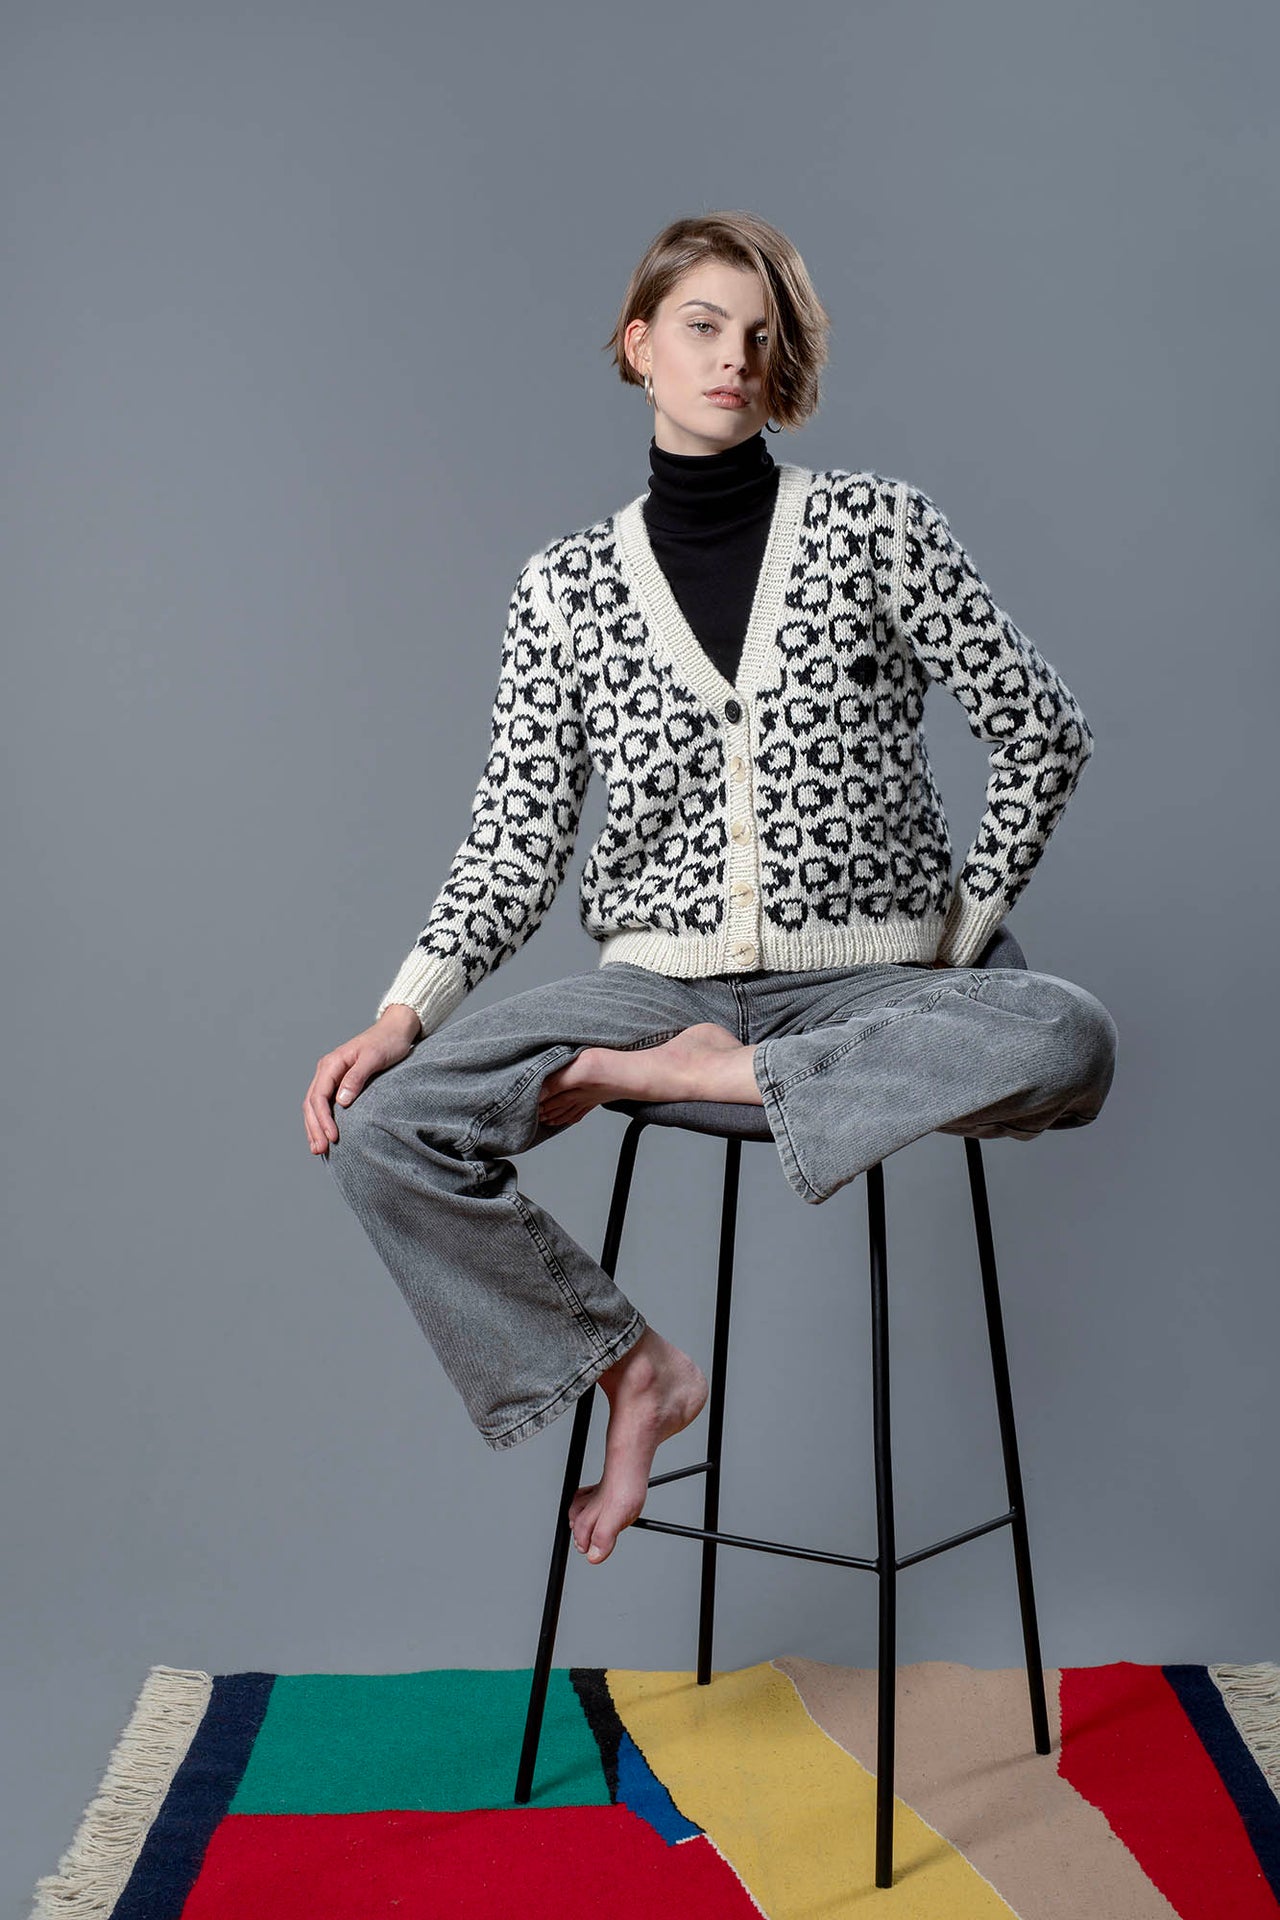 Woman sitting on a chair wearing a wool cardigan with a turtleneck underneath. The cardigan has a herd of white sheep all over with a single black sheep on the left side.  